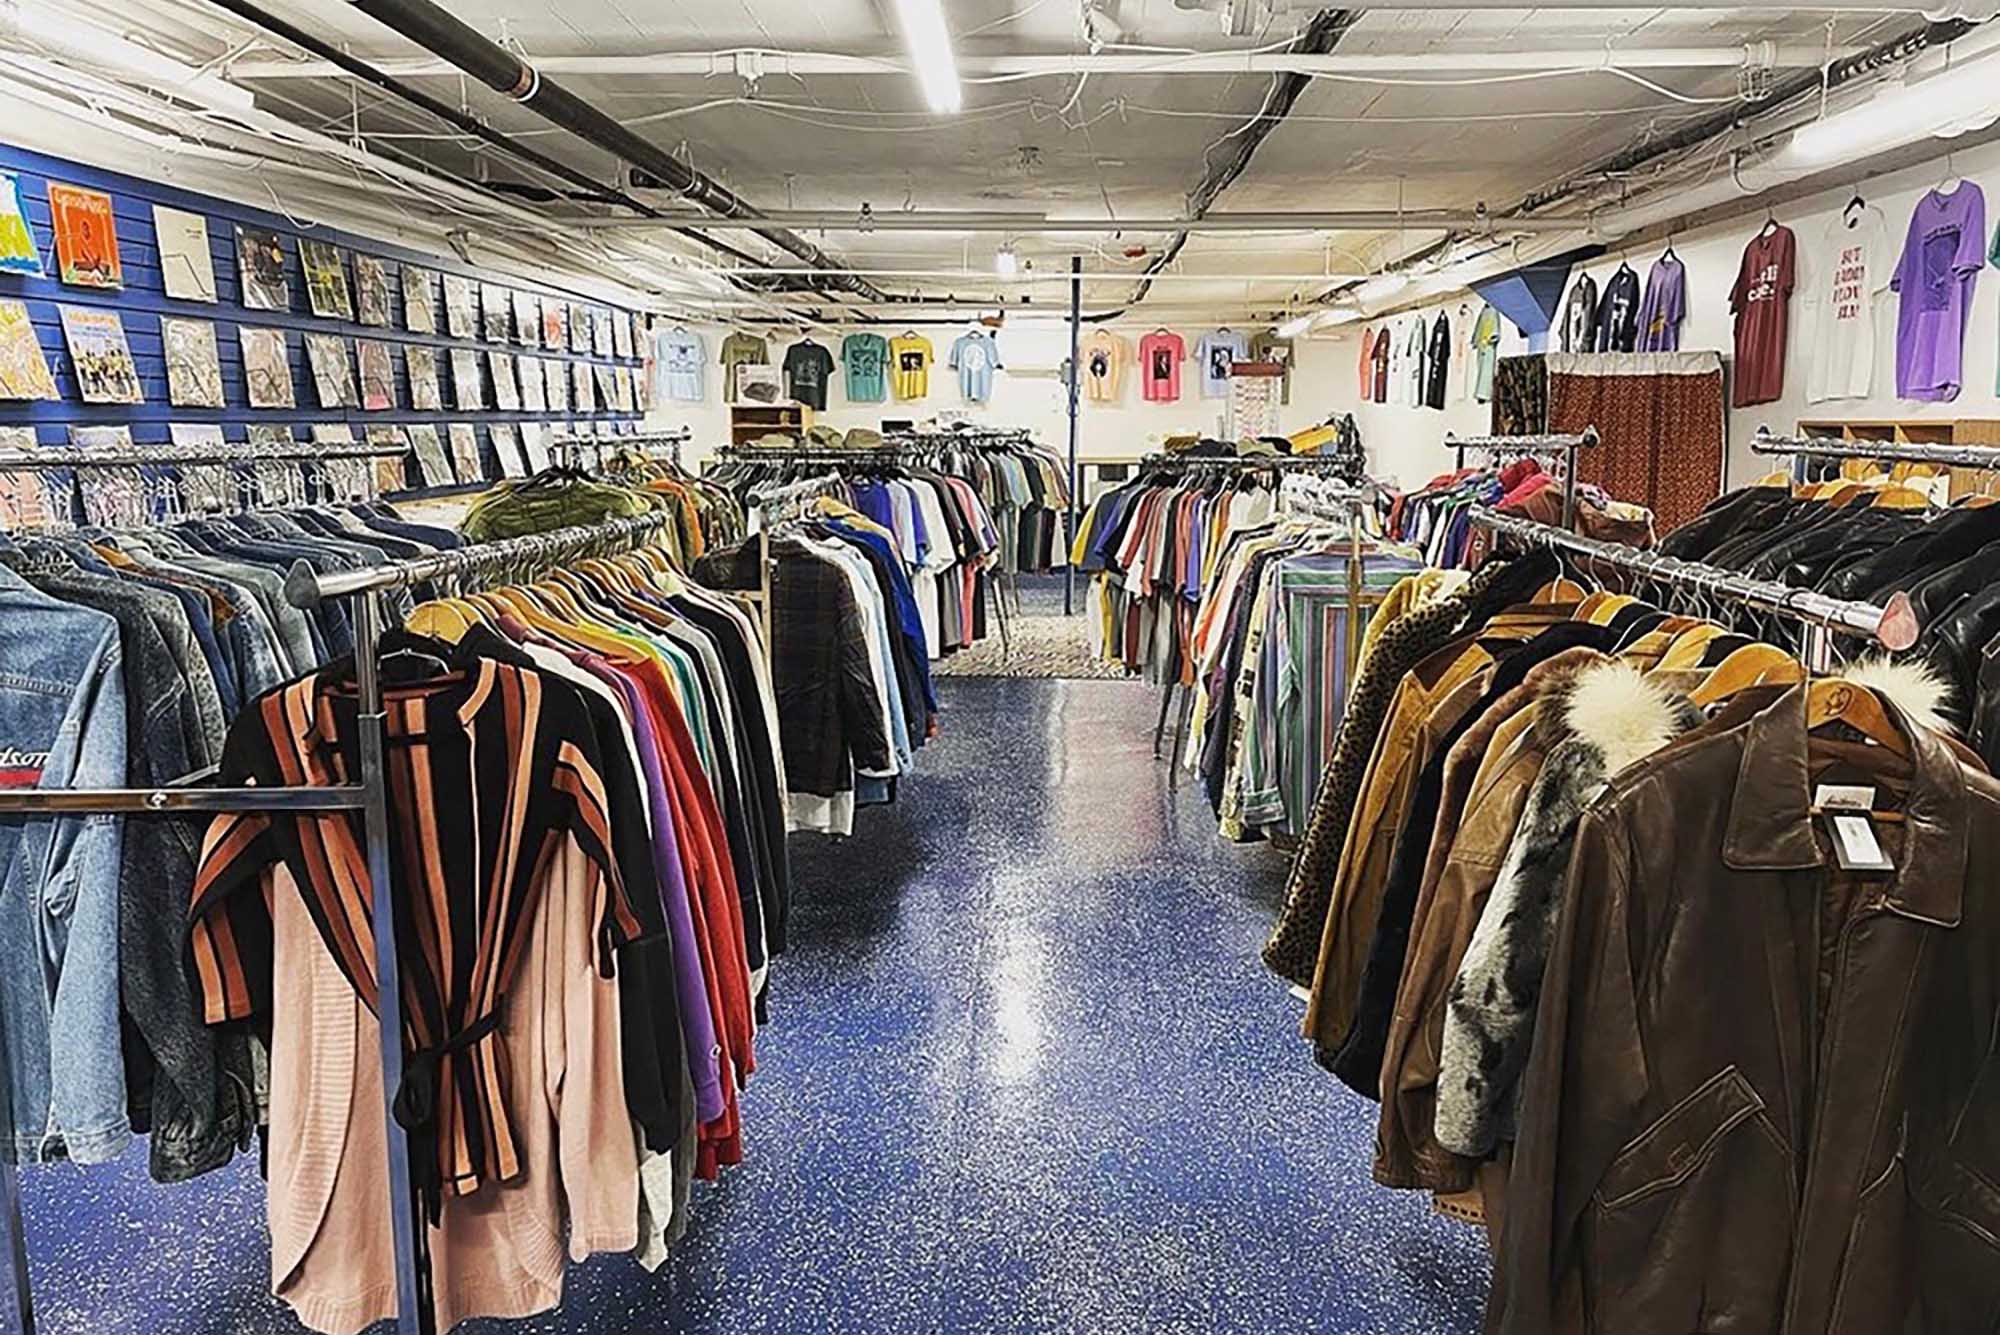 Photo: A shot of the clothing racks The Vintage Underground. The left and right are lined with clothing on hangers, while the interior was blue with overhead lighting.